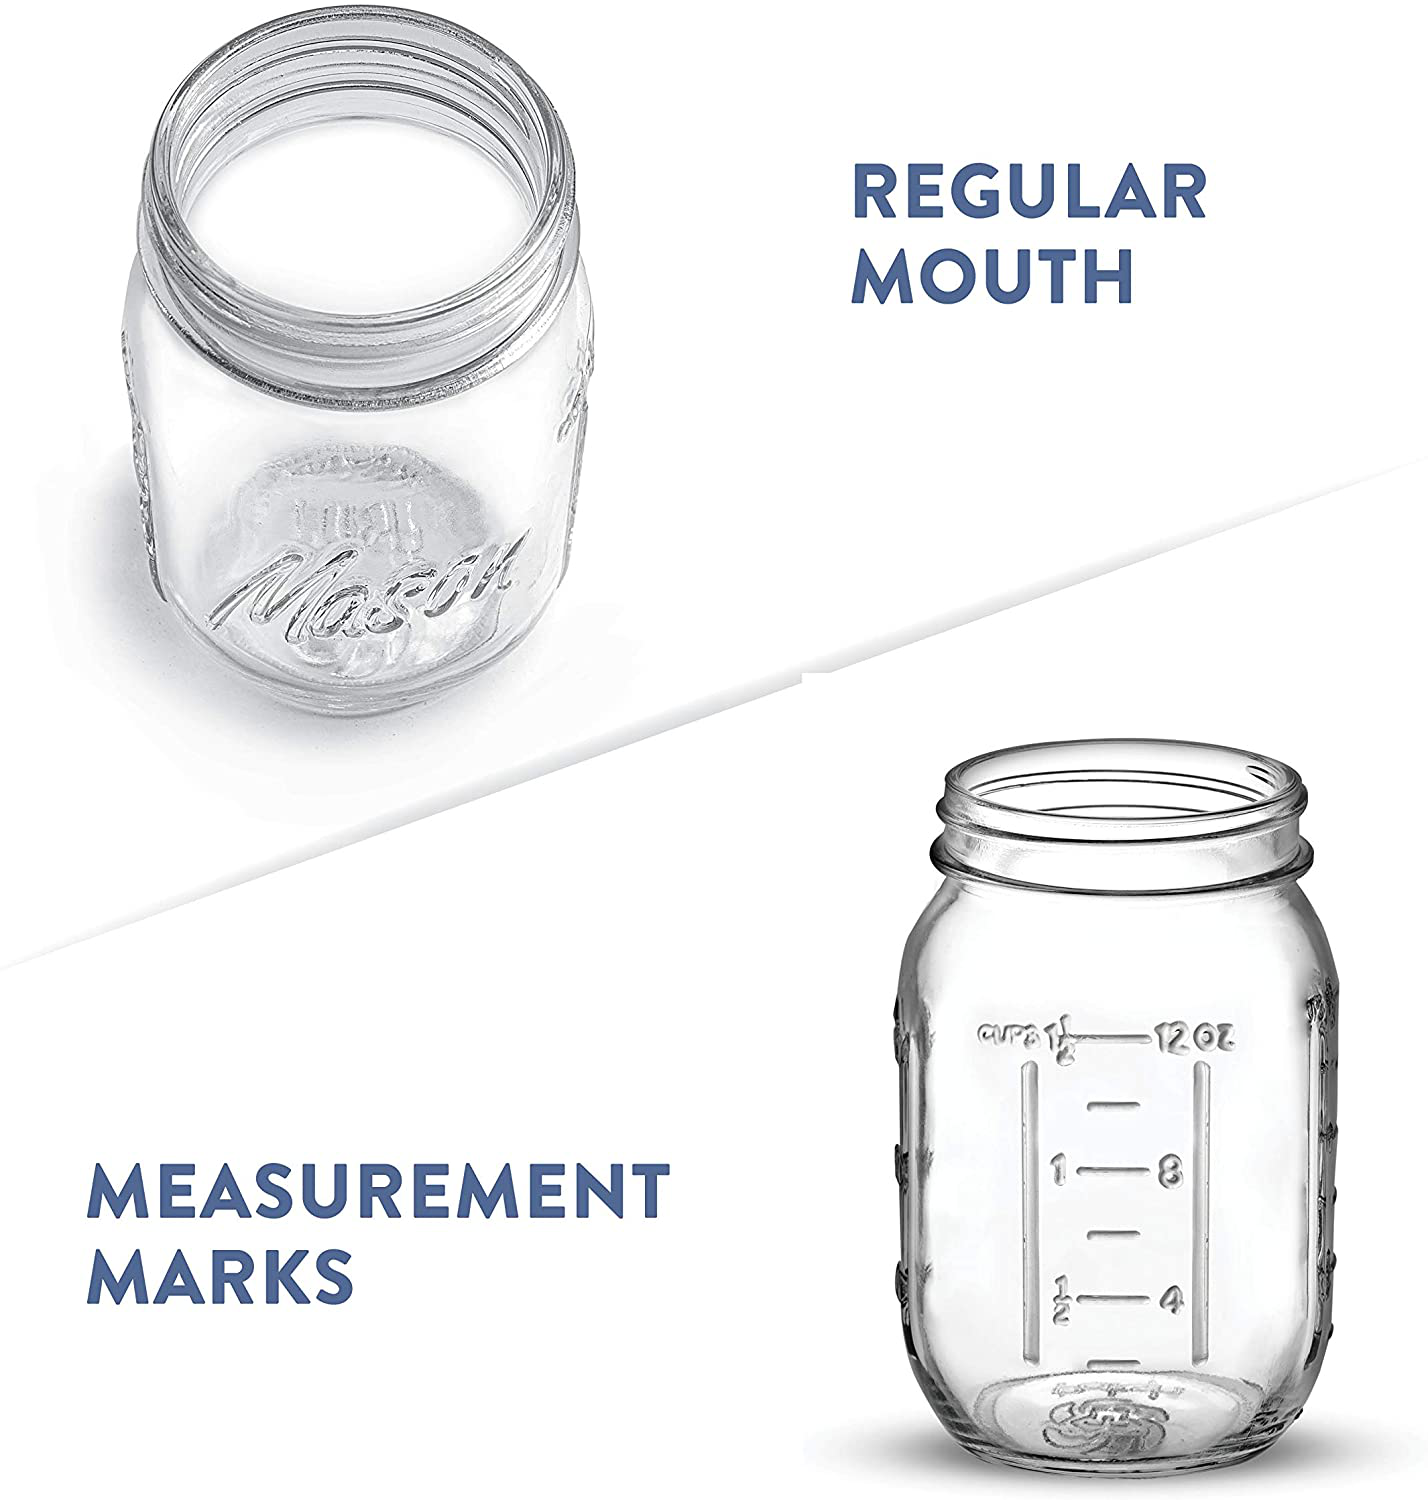 Regular-Mouth Glass Mason Jars, 16-Ounce Glass Canning Jars with Silver Metal Airtight Lids and Bands with Measurement Marks, for Canning, Preserving, Meal Prep, Overnight Oats, Jam, Jelly, (10 Pack)